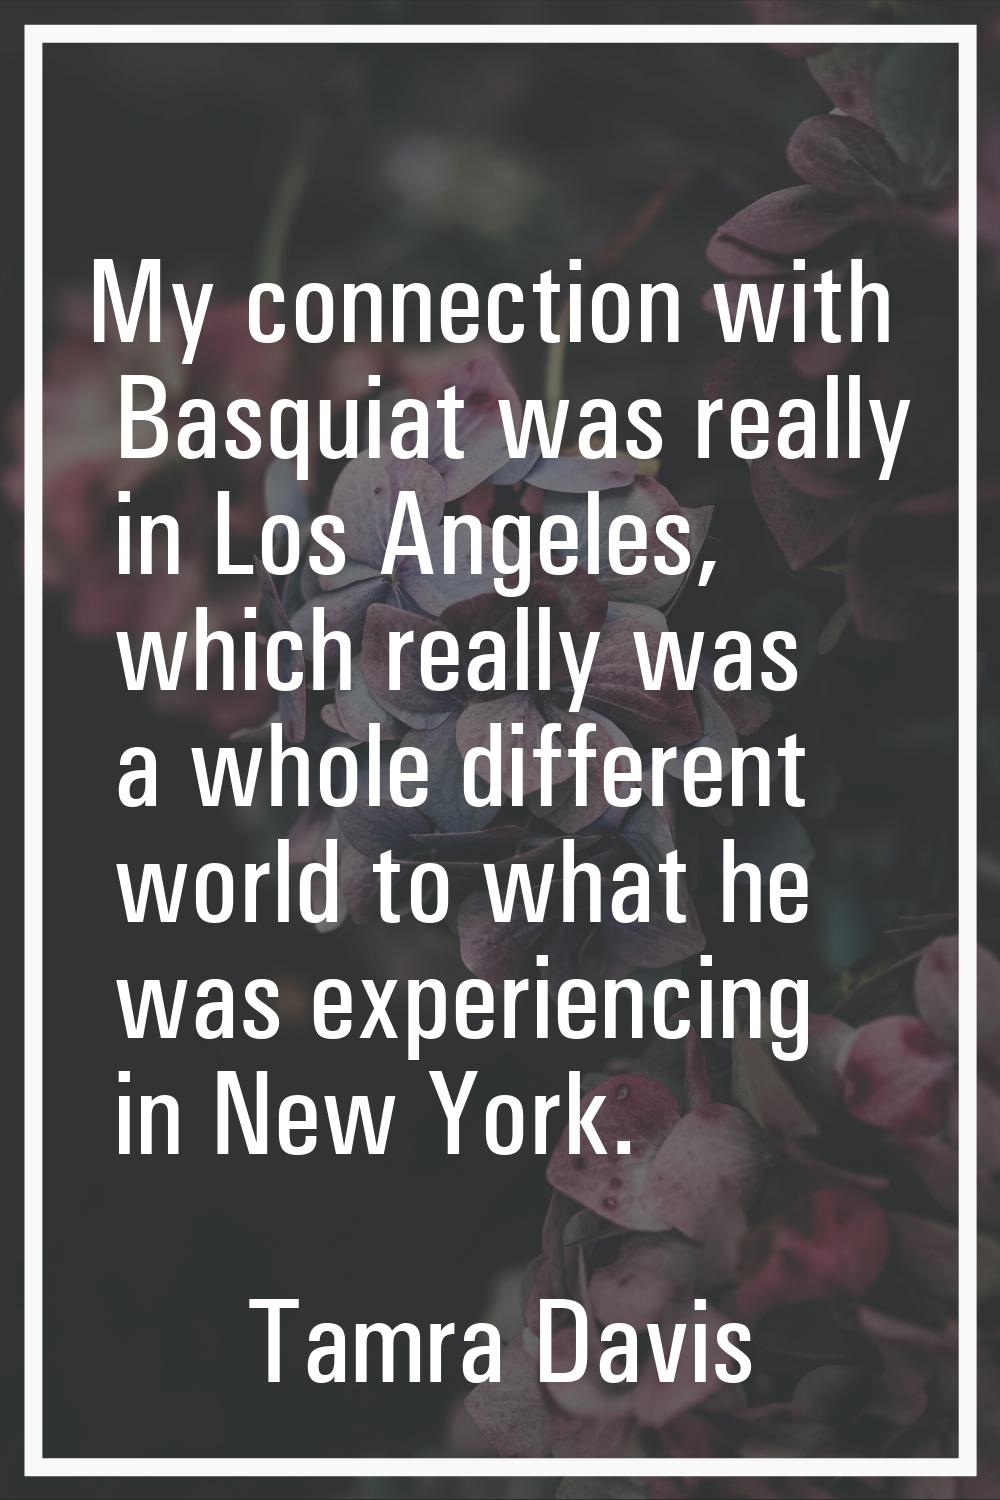 My connection with Basquiat was really in Los Angeles, which really was a whole different world to 